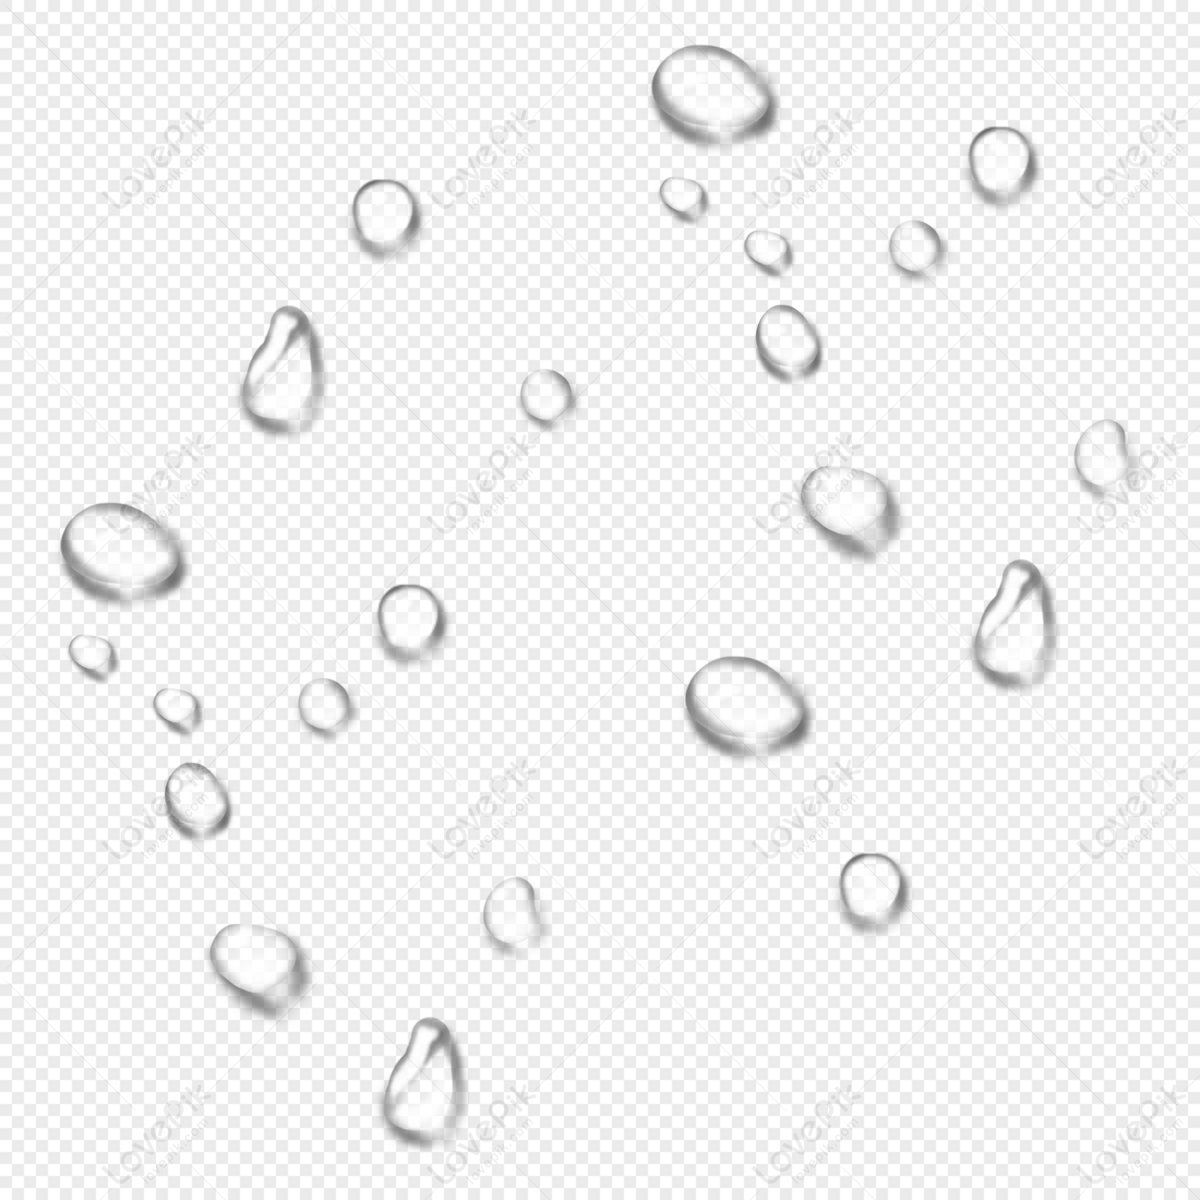 Drips Of Rain Drops PNG Transparent Background And Clipart Image For Free  Download - Lovepik | 400862890